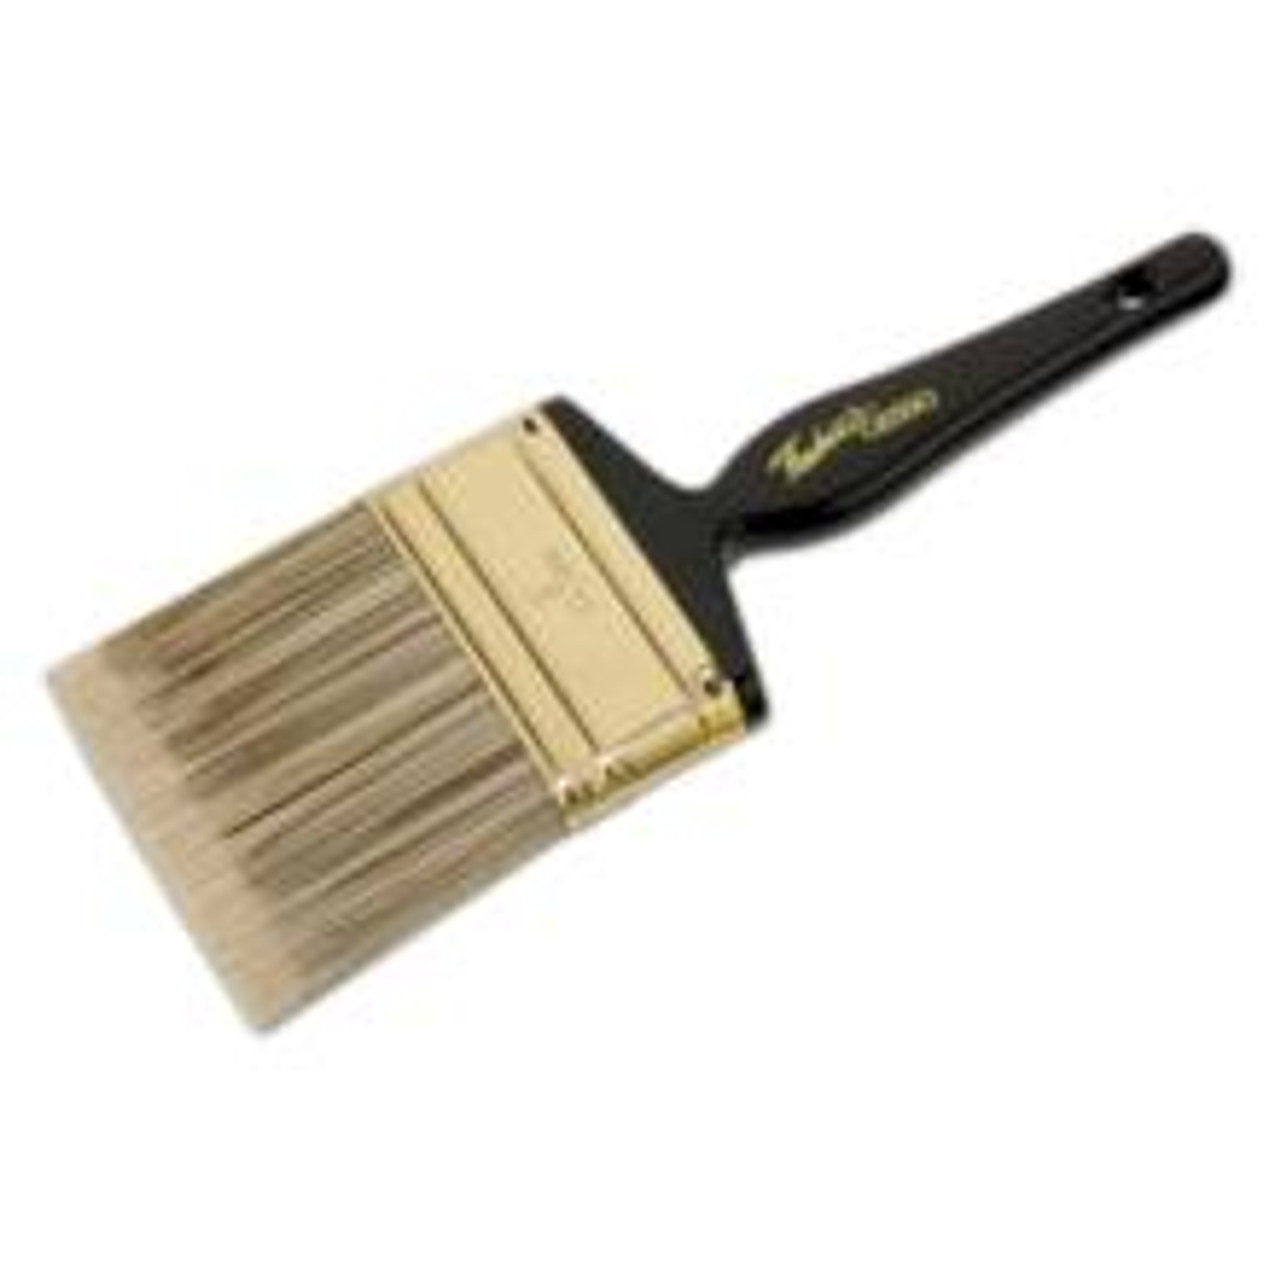 Hake Brush by Pro Art - 3 by 1 Inch